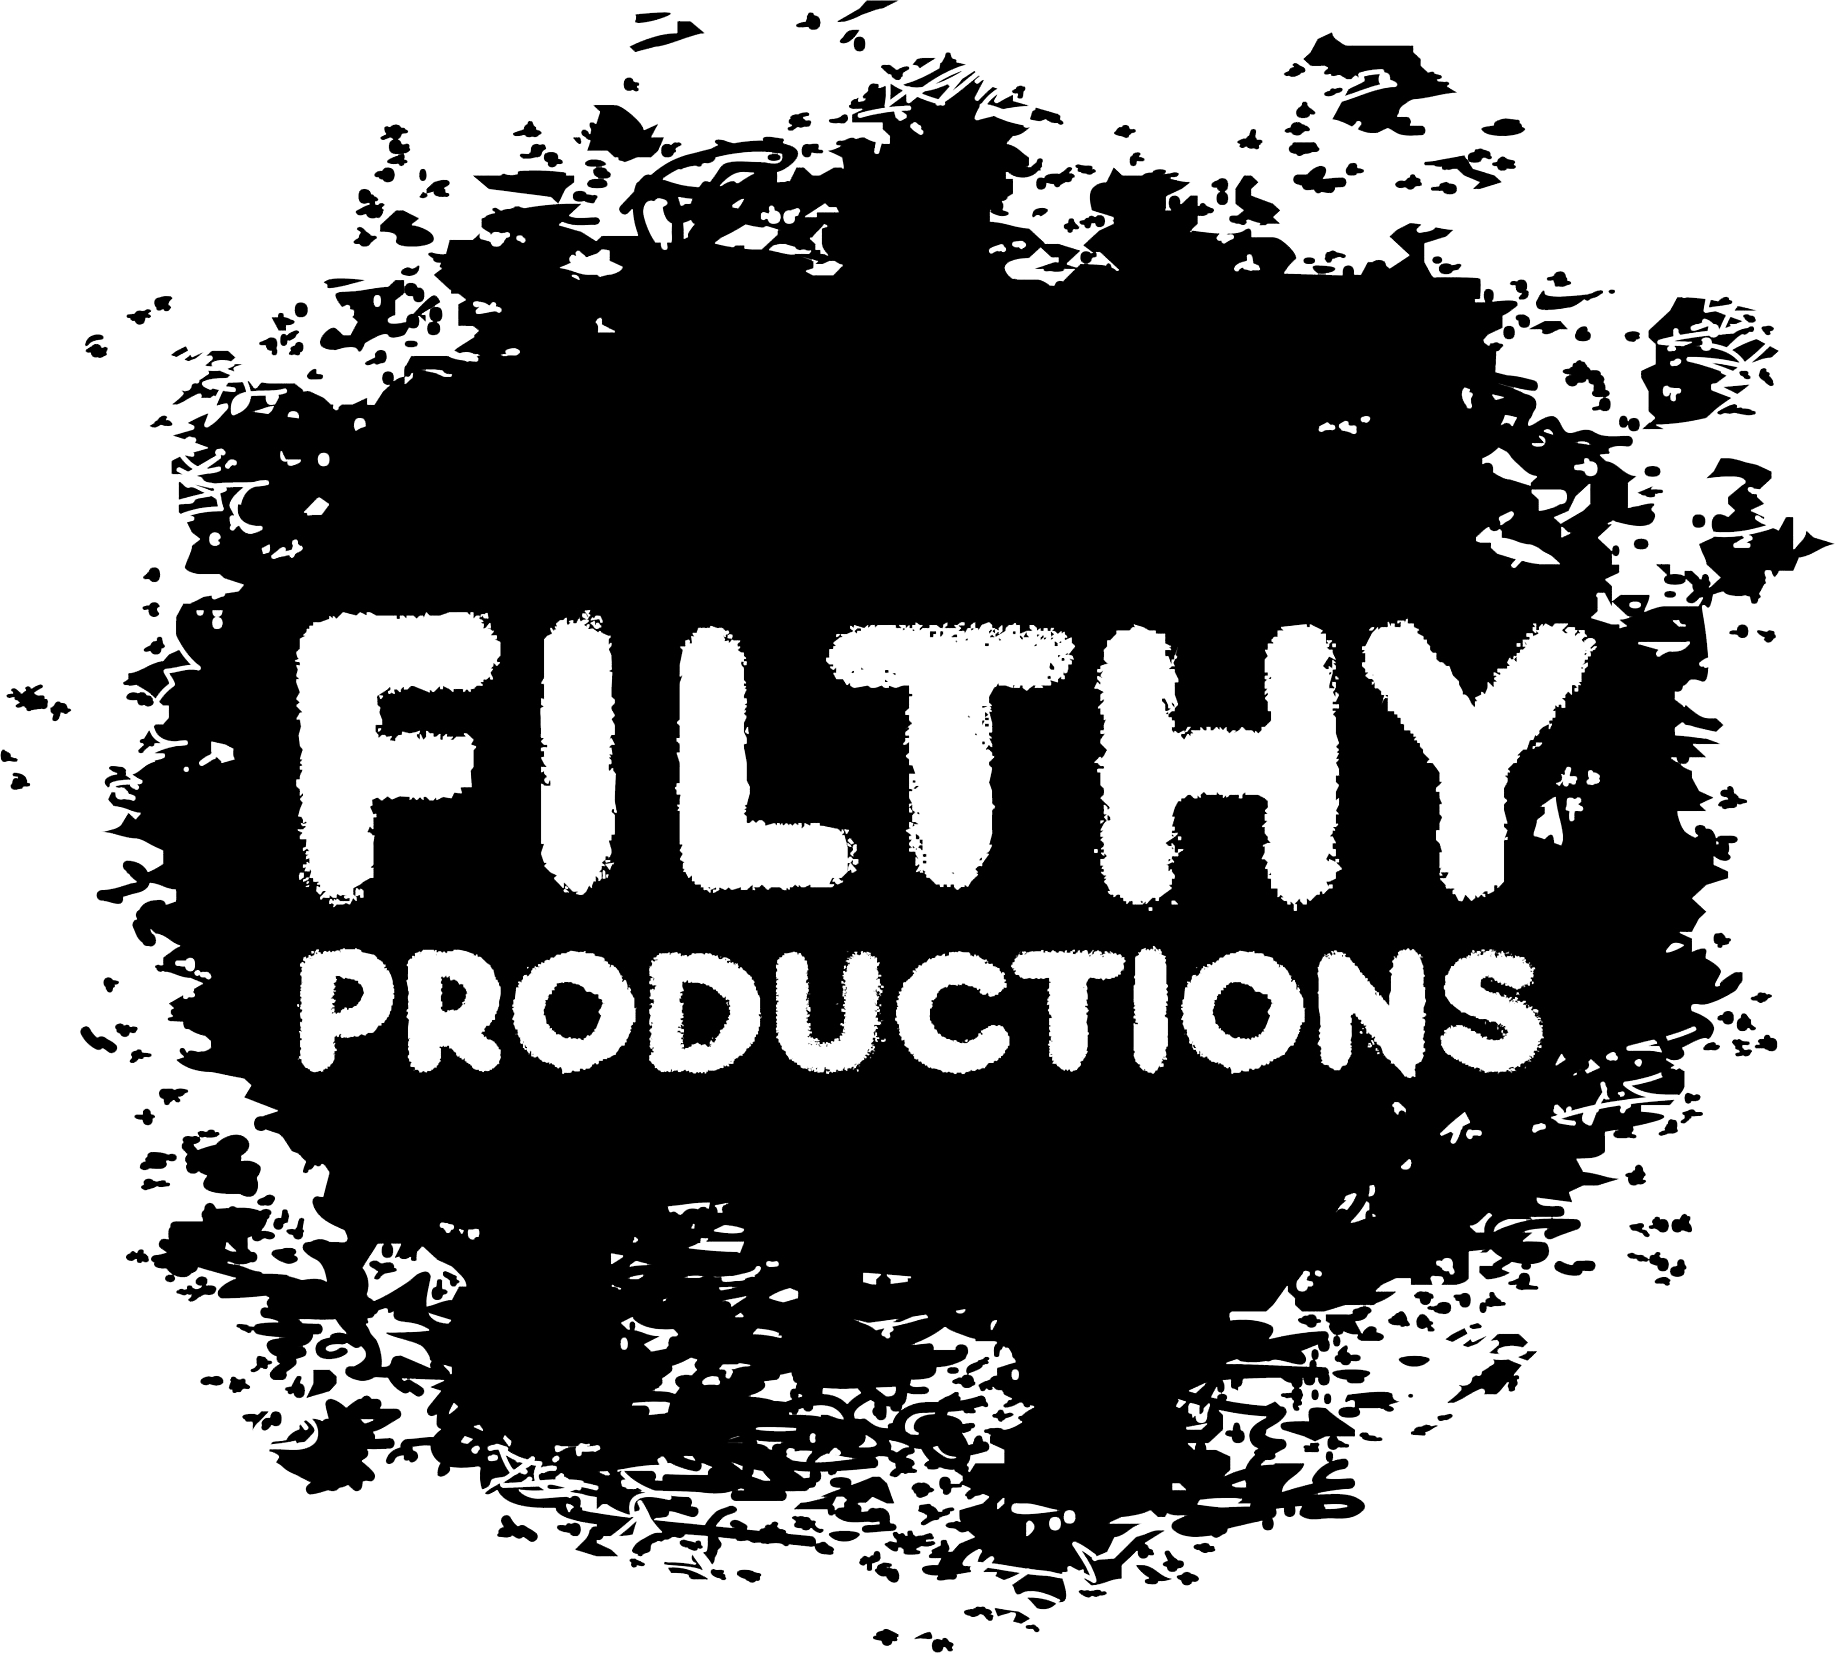 Filthy Productions - company